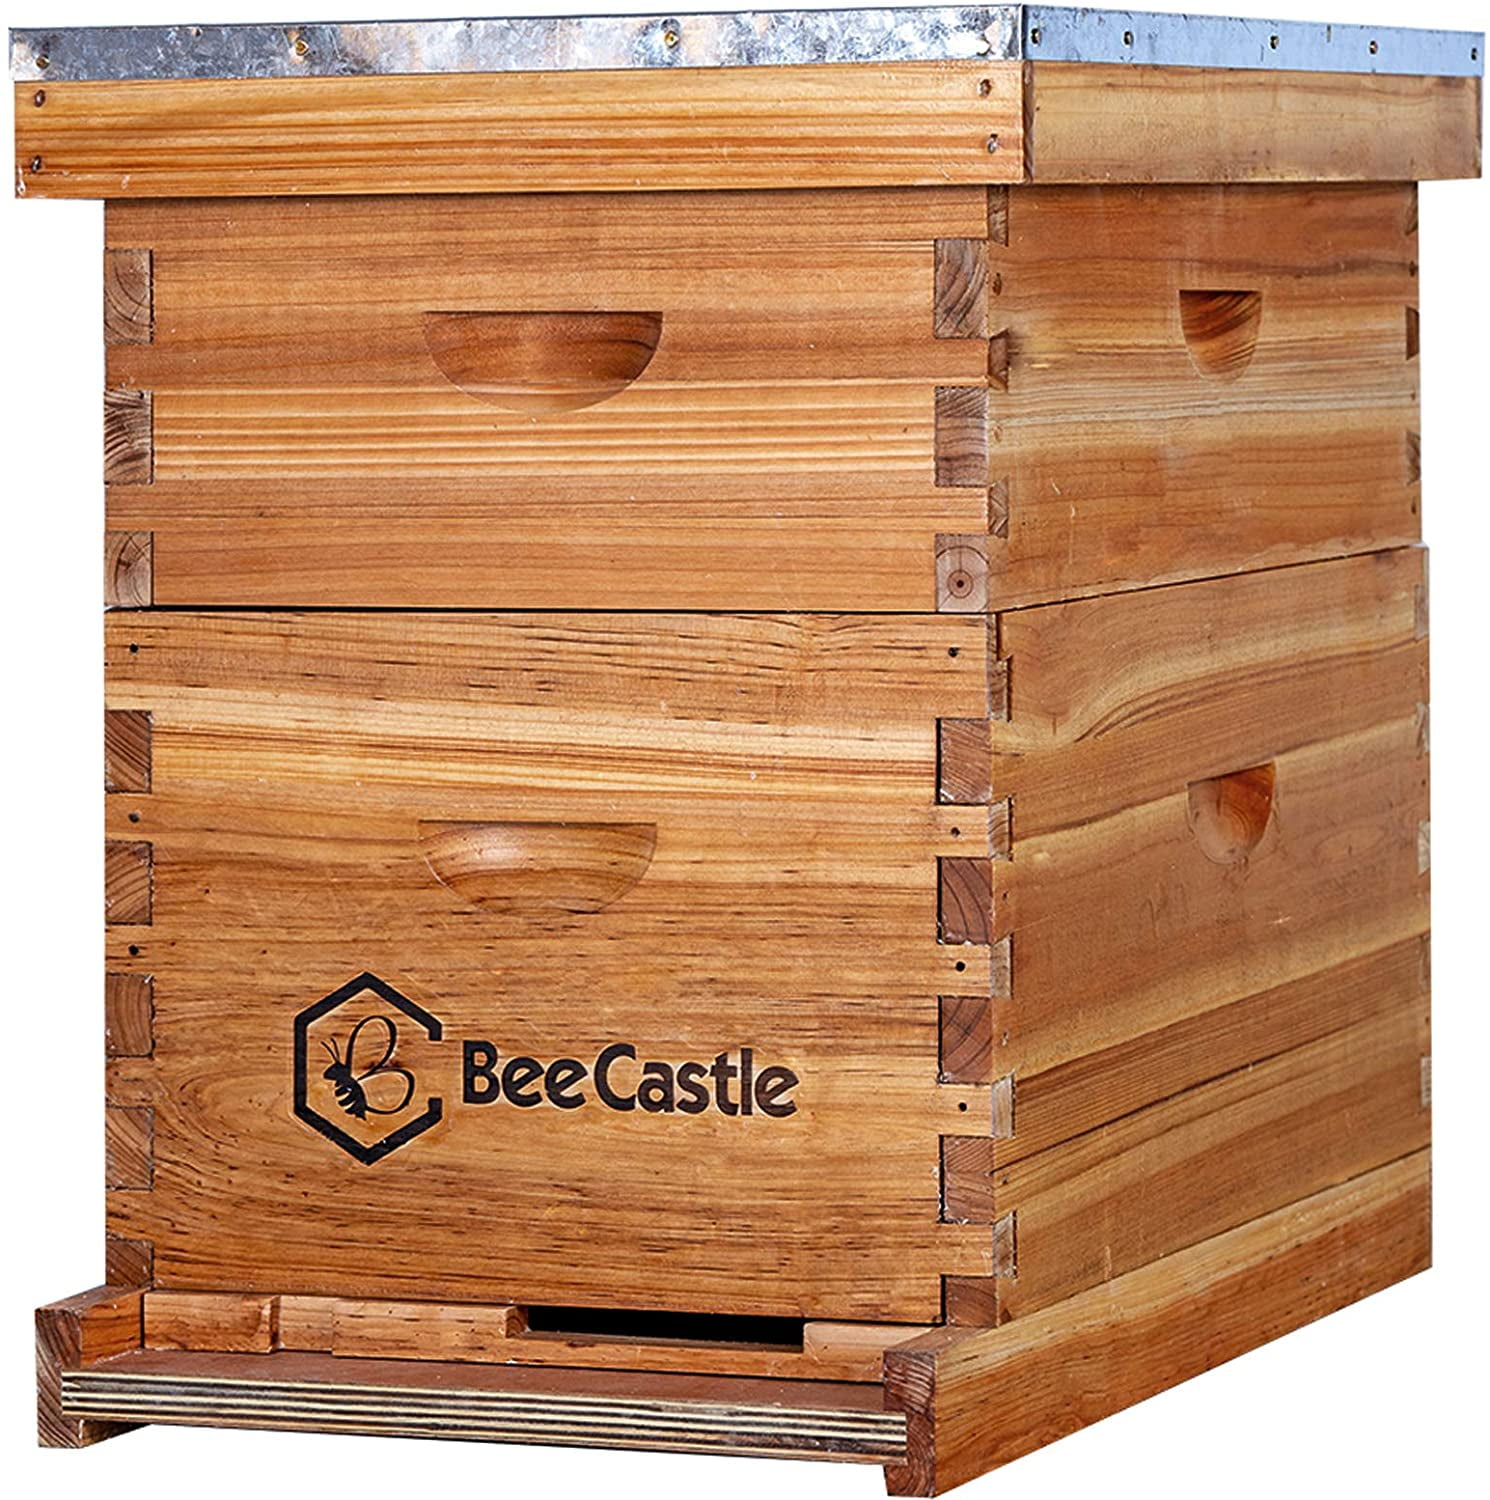 Details about   20 Deep 20 Medium 40-Frame Size Beekeeping Kit Bee Hive House Frame 4-Layer 